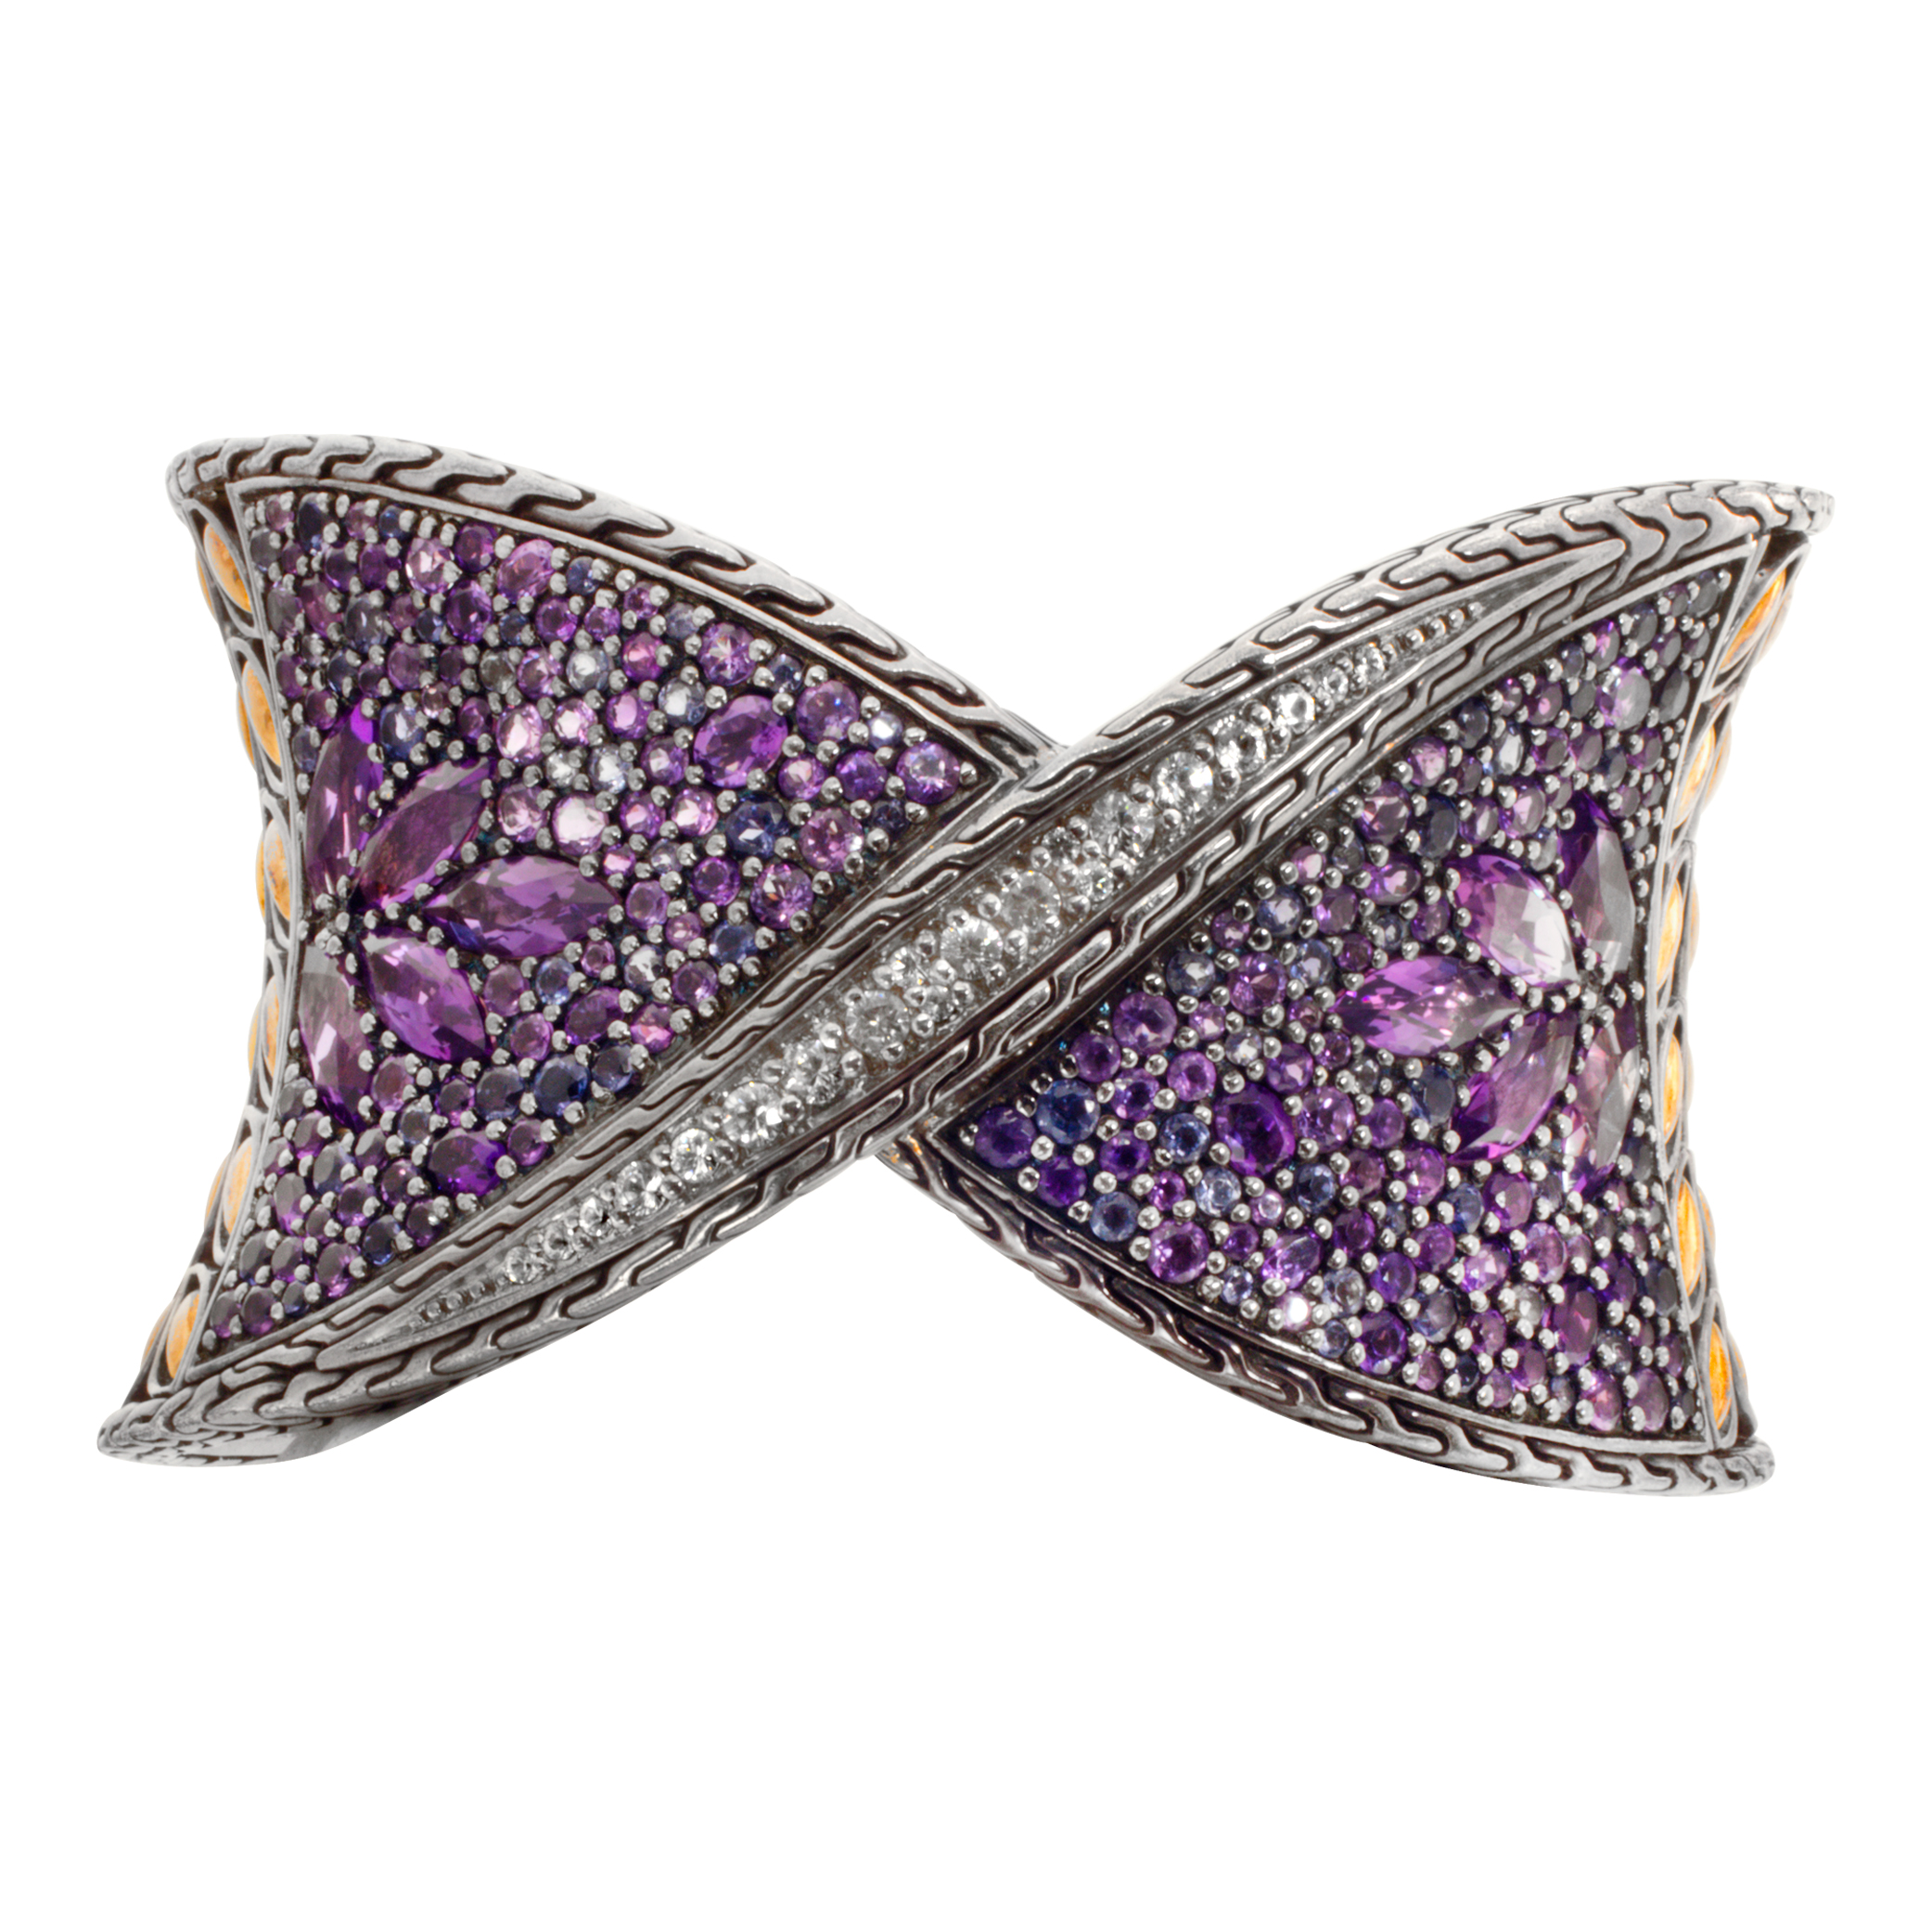 John Hardy BATU KAWUNG collection, Wide cuff bracelet in 18K & Sterling Silver with Amethyst, white and blue Sapphires. (Stones)